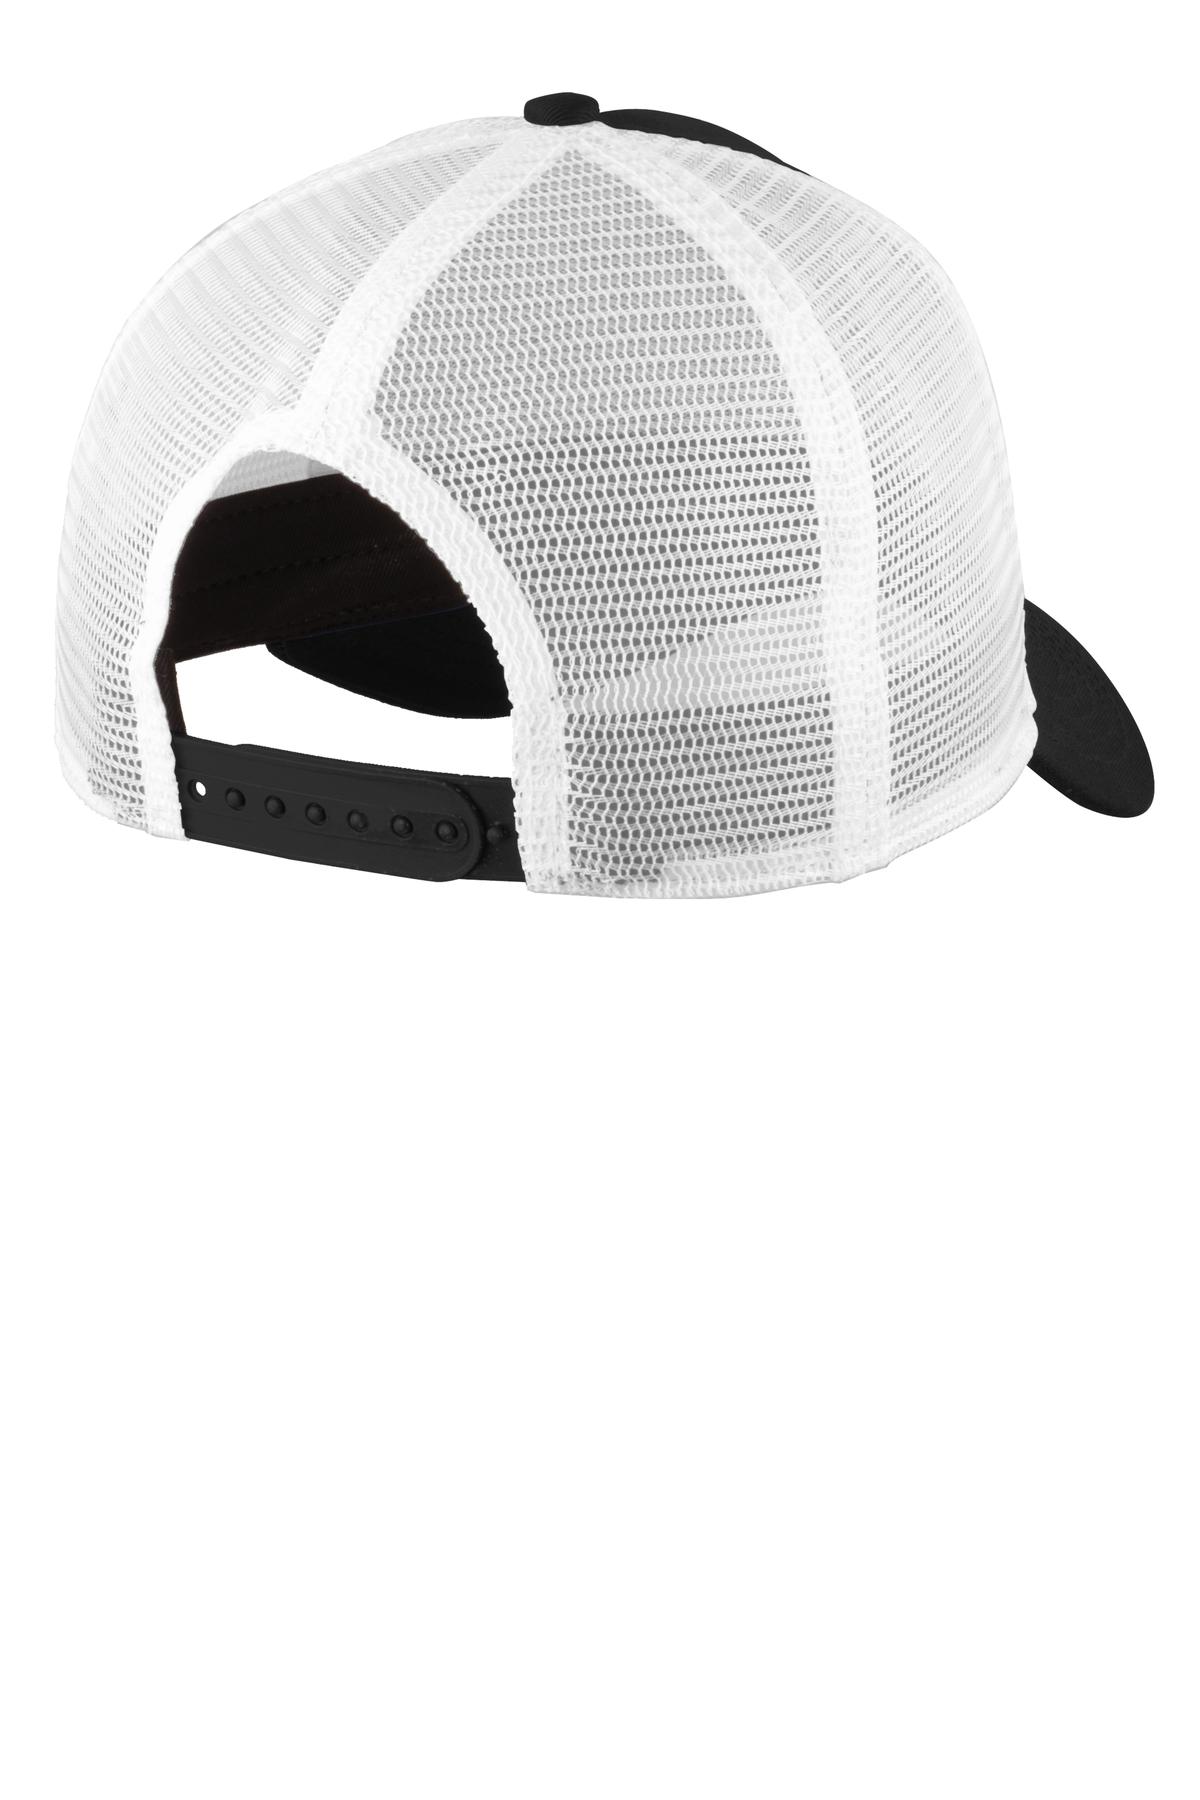 New Era Black/White Mesh Snapback Cap with Subdued Puerto Rico RIcan Patch NE205